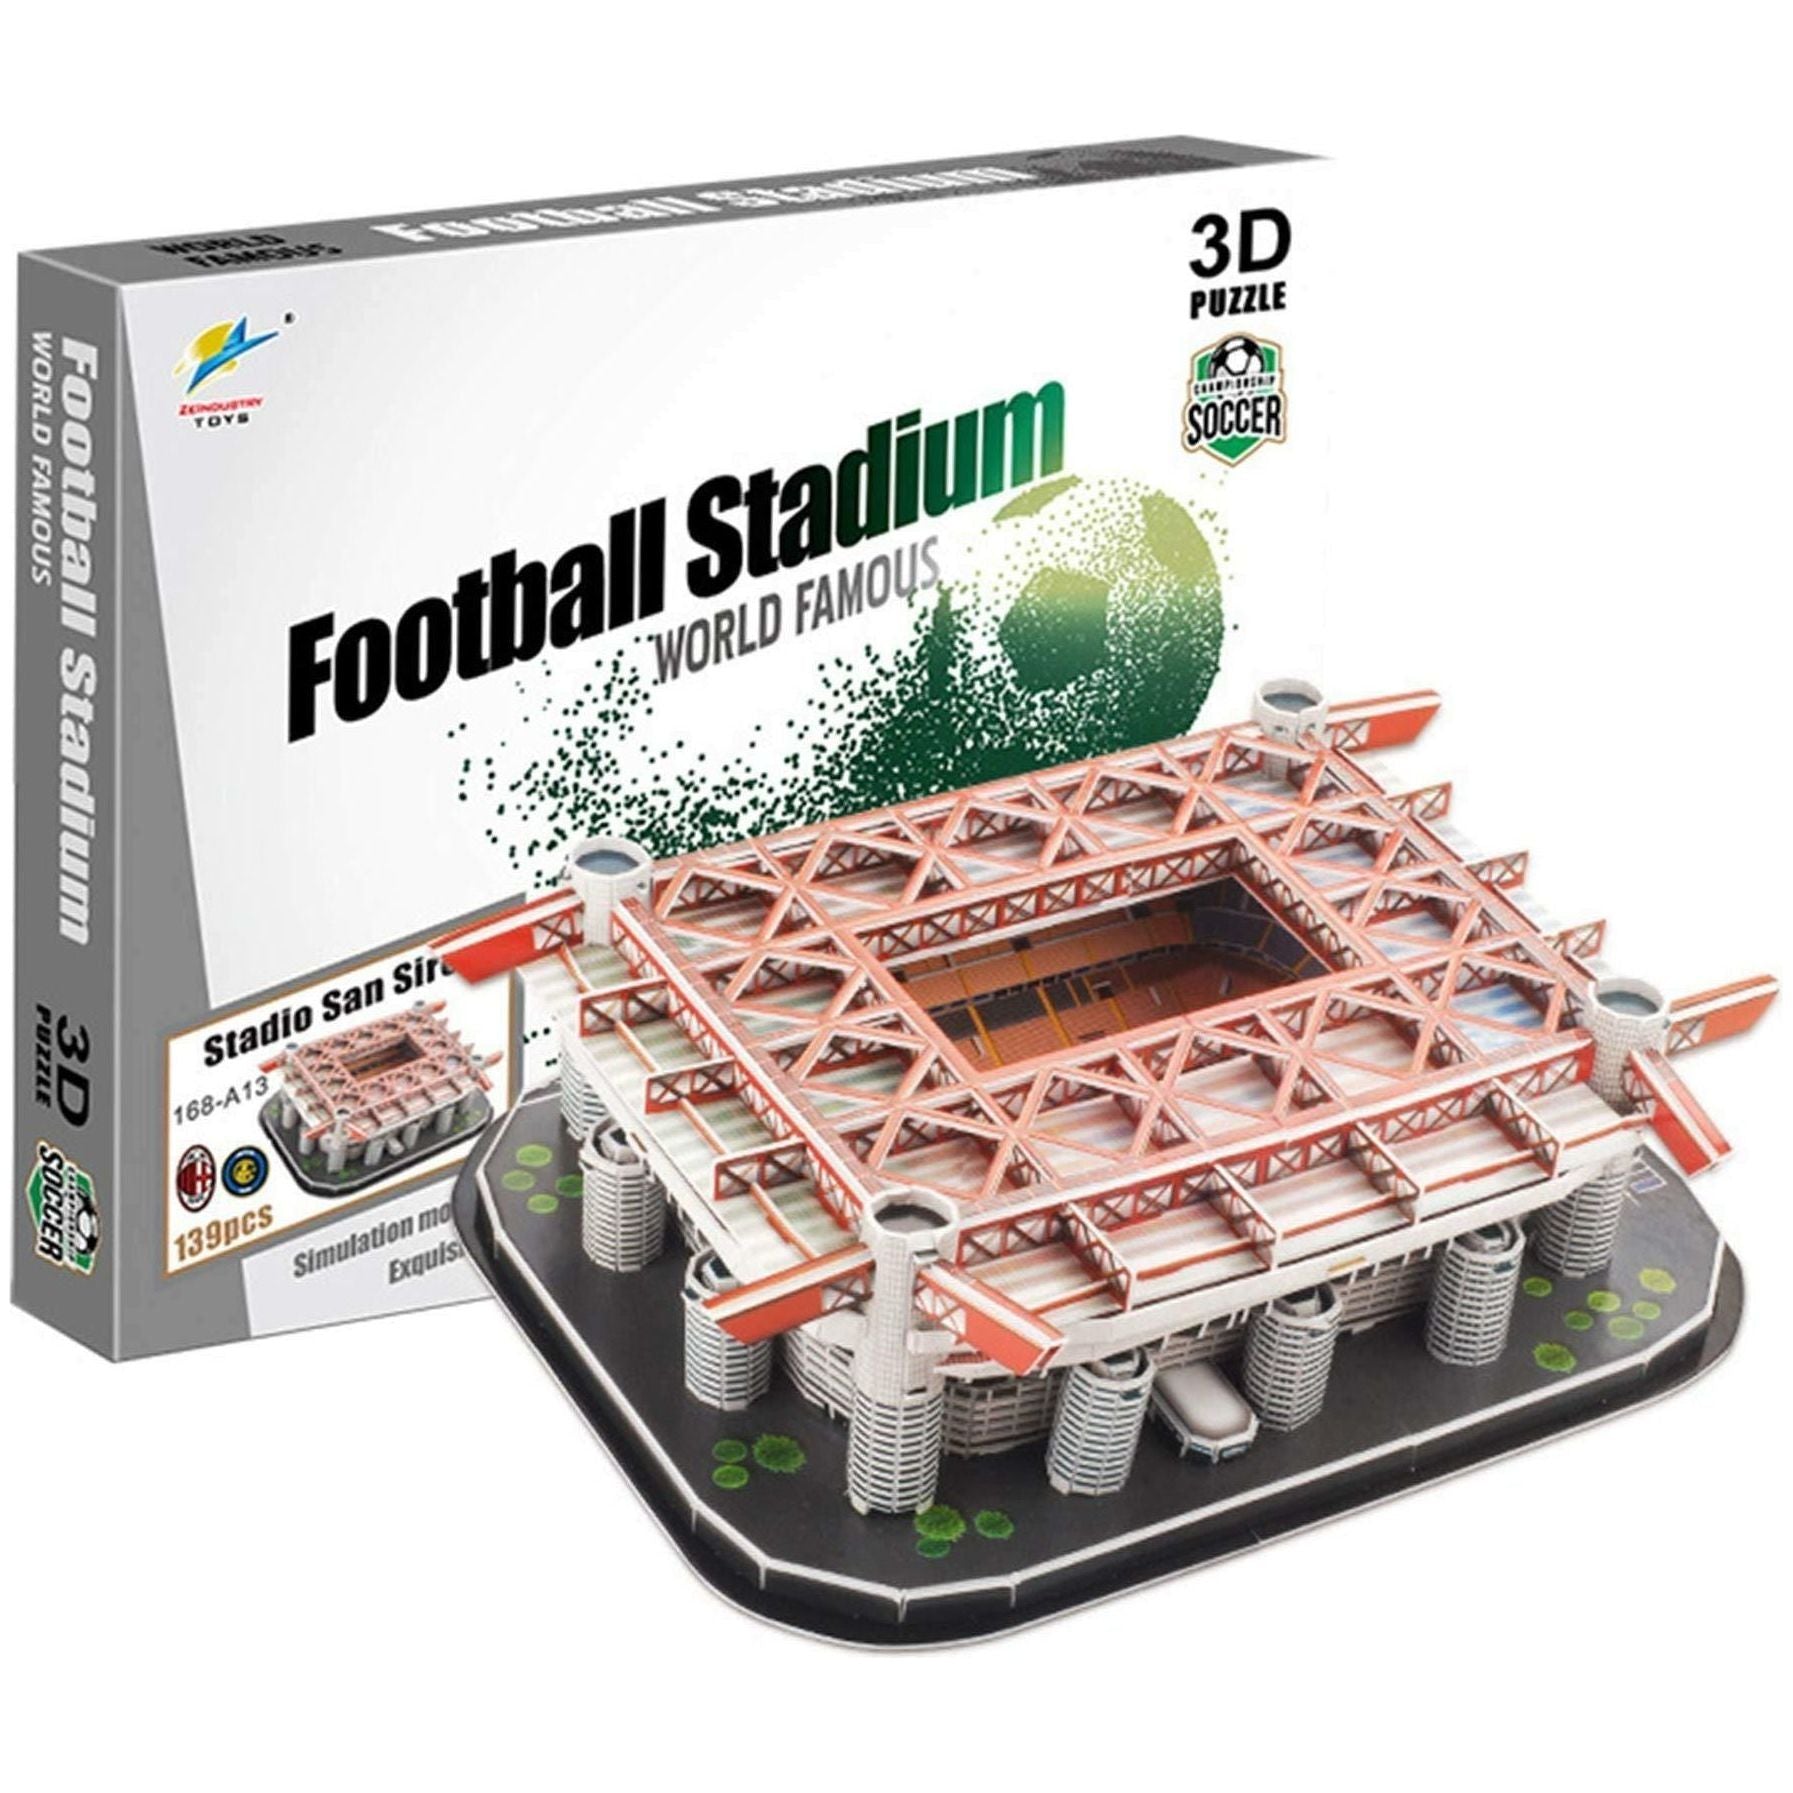 Football Stadium 3D Puzzle Studio San Siro 139 Pieces - BumbleToys - 5-7 Years, Boys, Puzzle & Board & Card Games, Puzzles & Jigsaws, Toy Land